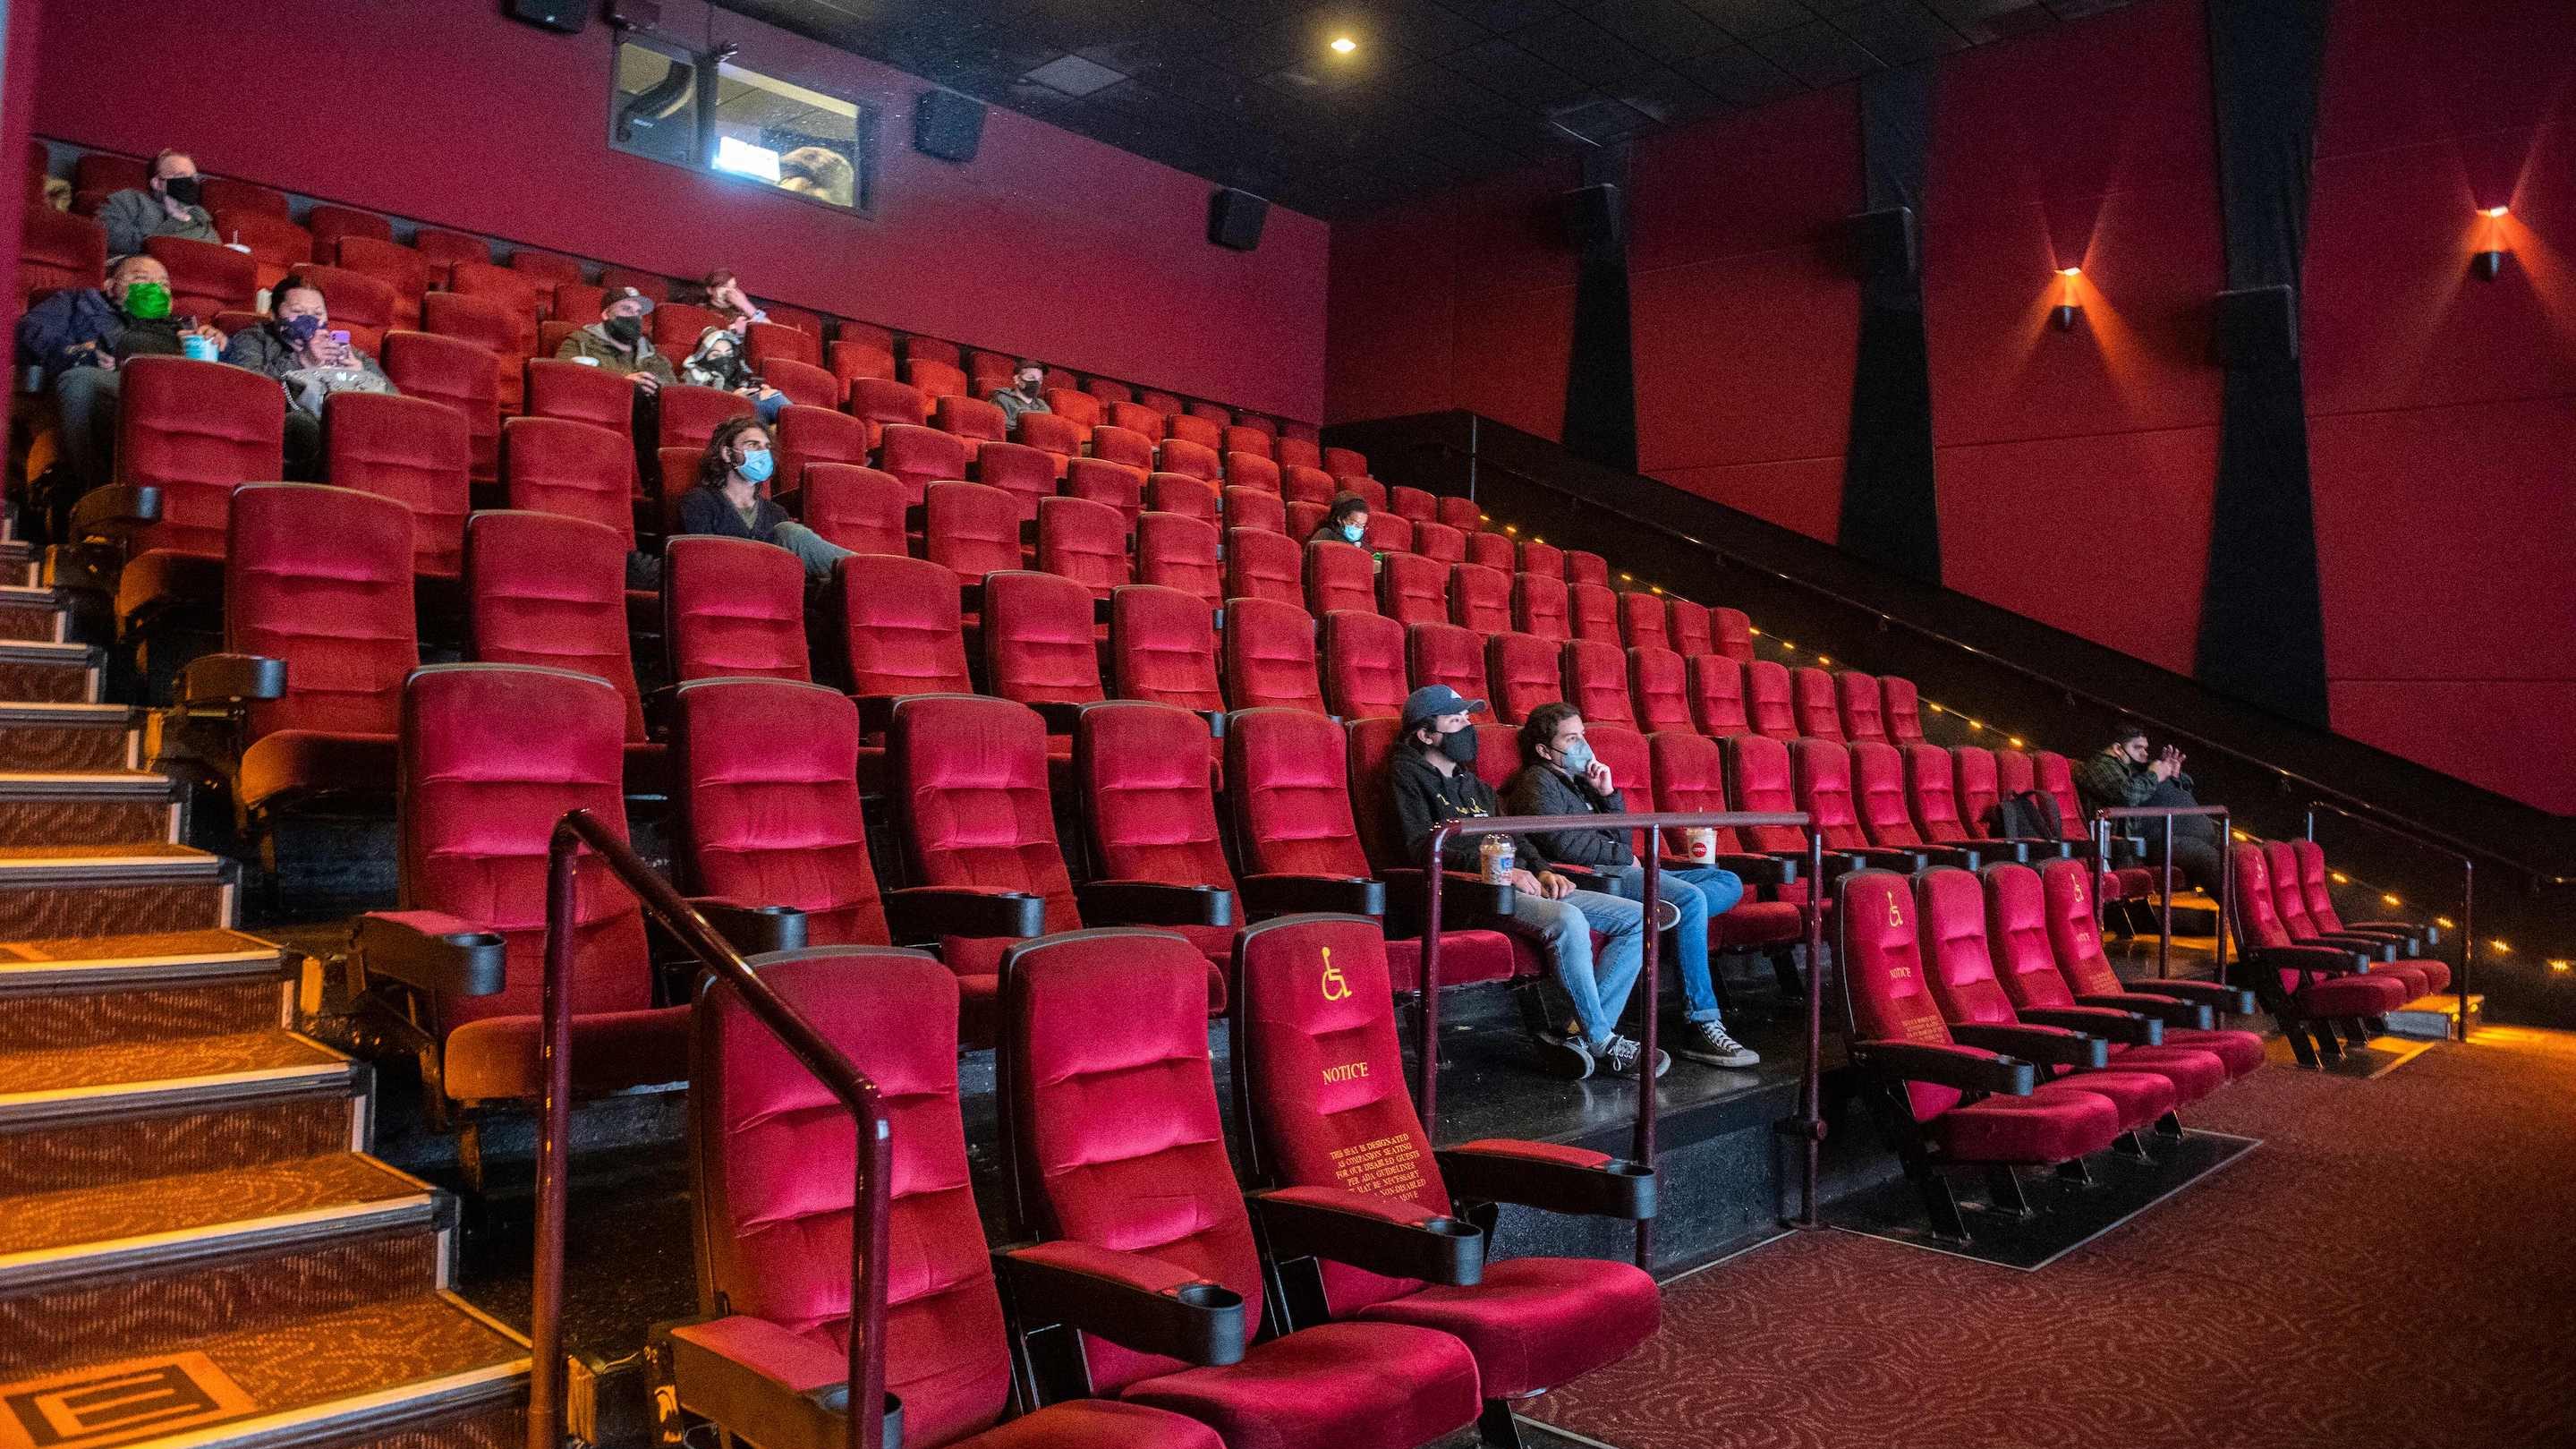 Are audiences ready to return to movie theaters? - Marketplace